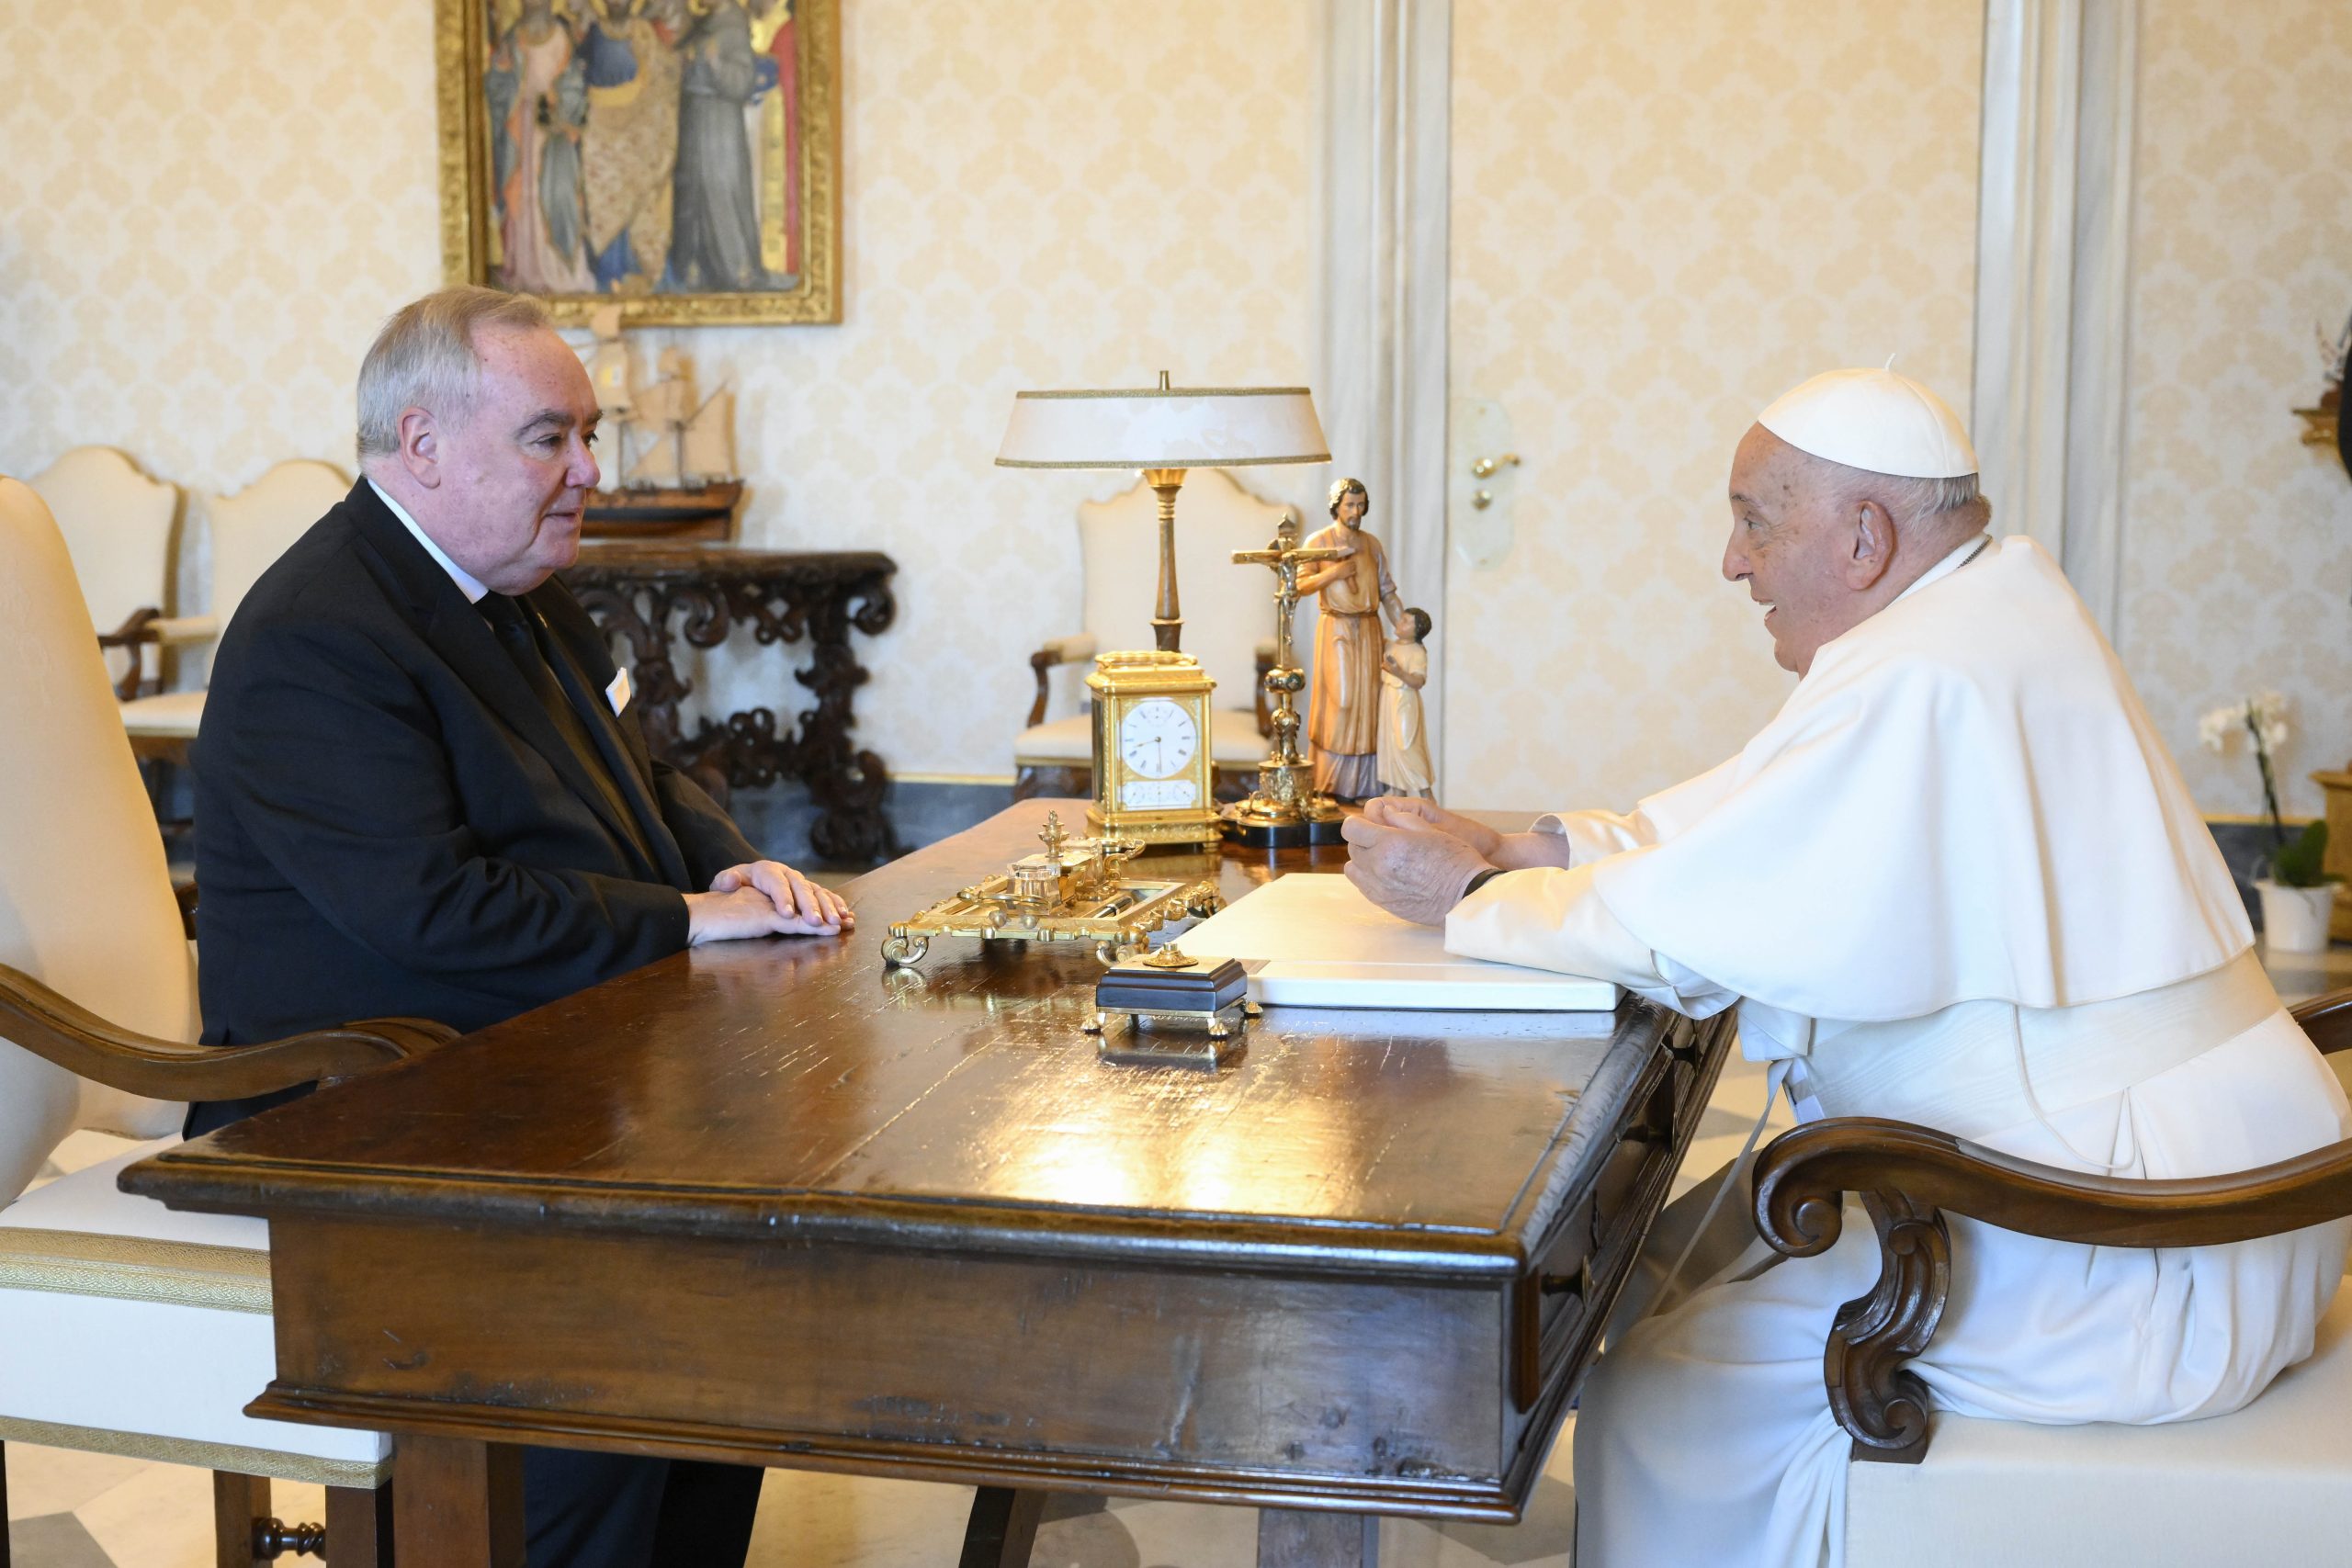 The Grand Master received in audience by Pope Francis